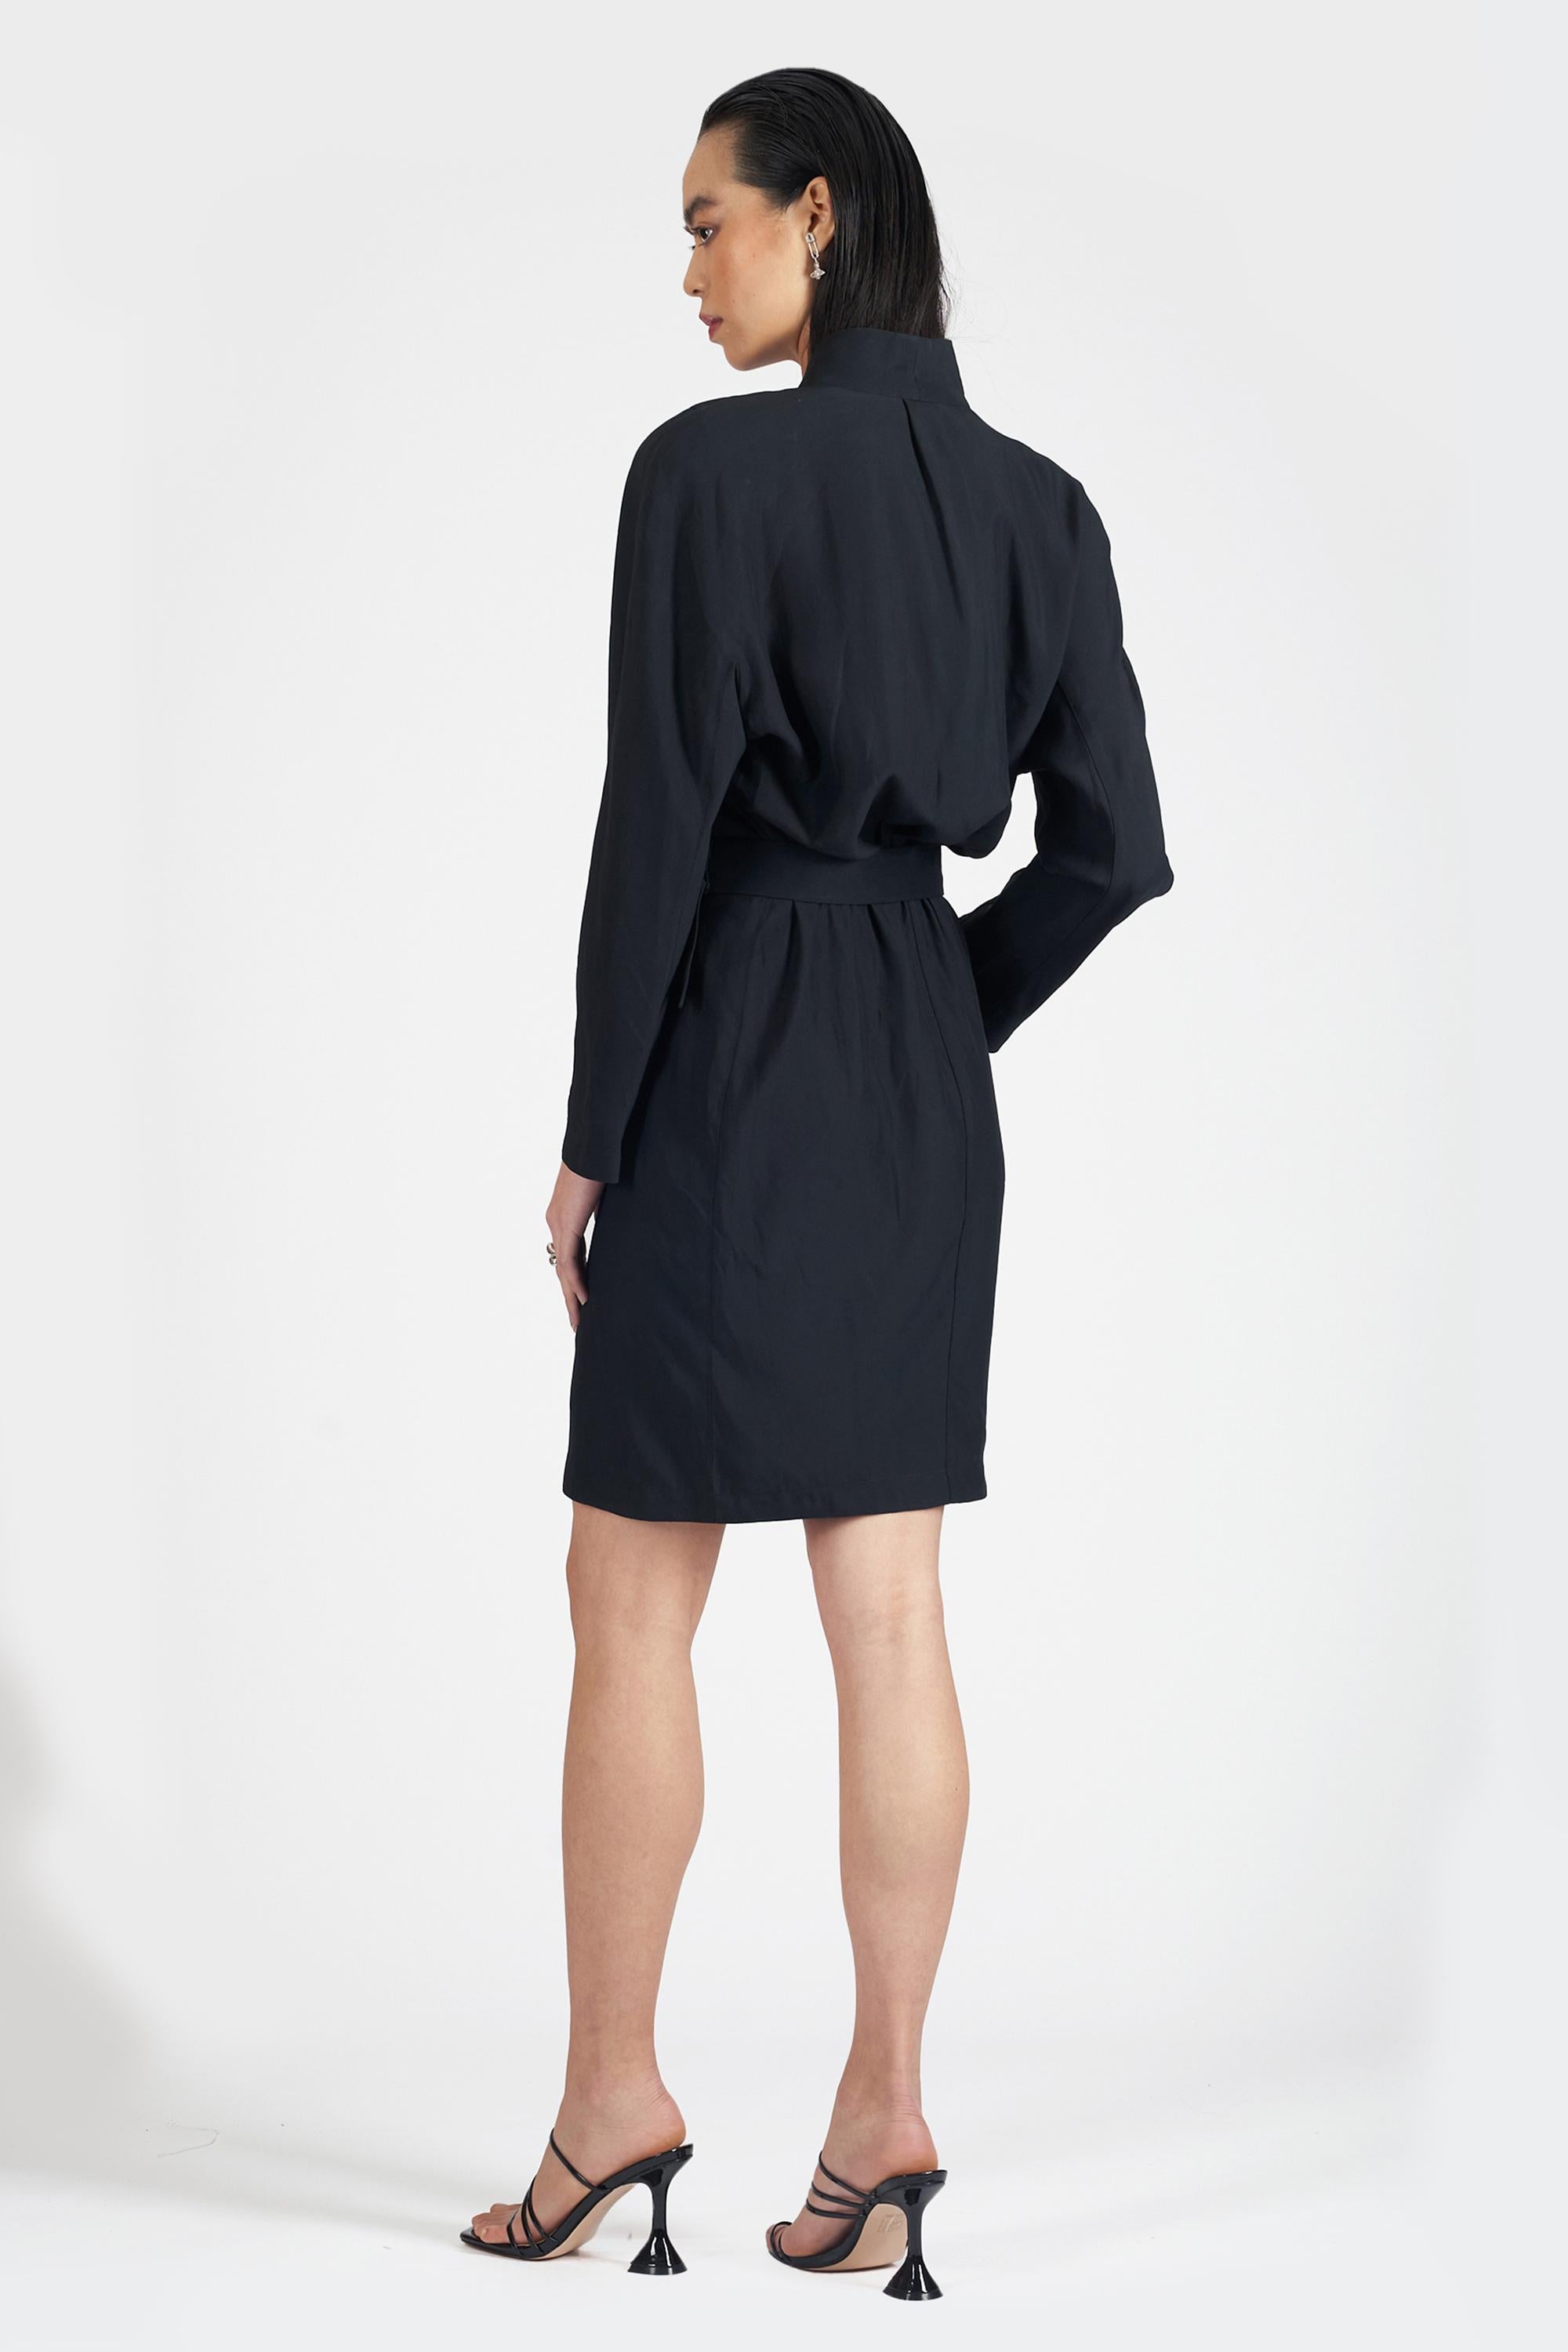 We are excited to present this incredibly rare Thierry Mugler 1991 black structured wrap dress. Features long sleeves, v-neckline, shoulder pads, pockets and knee length. In excellent vintage condition. Authenticity guaranteed.

Label size: 38